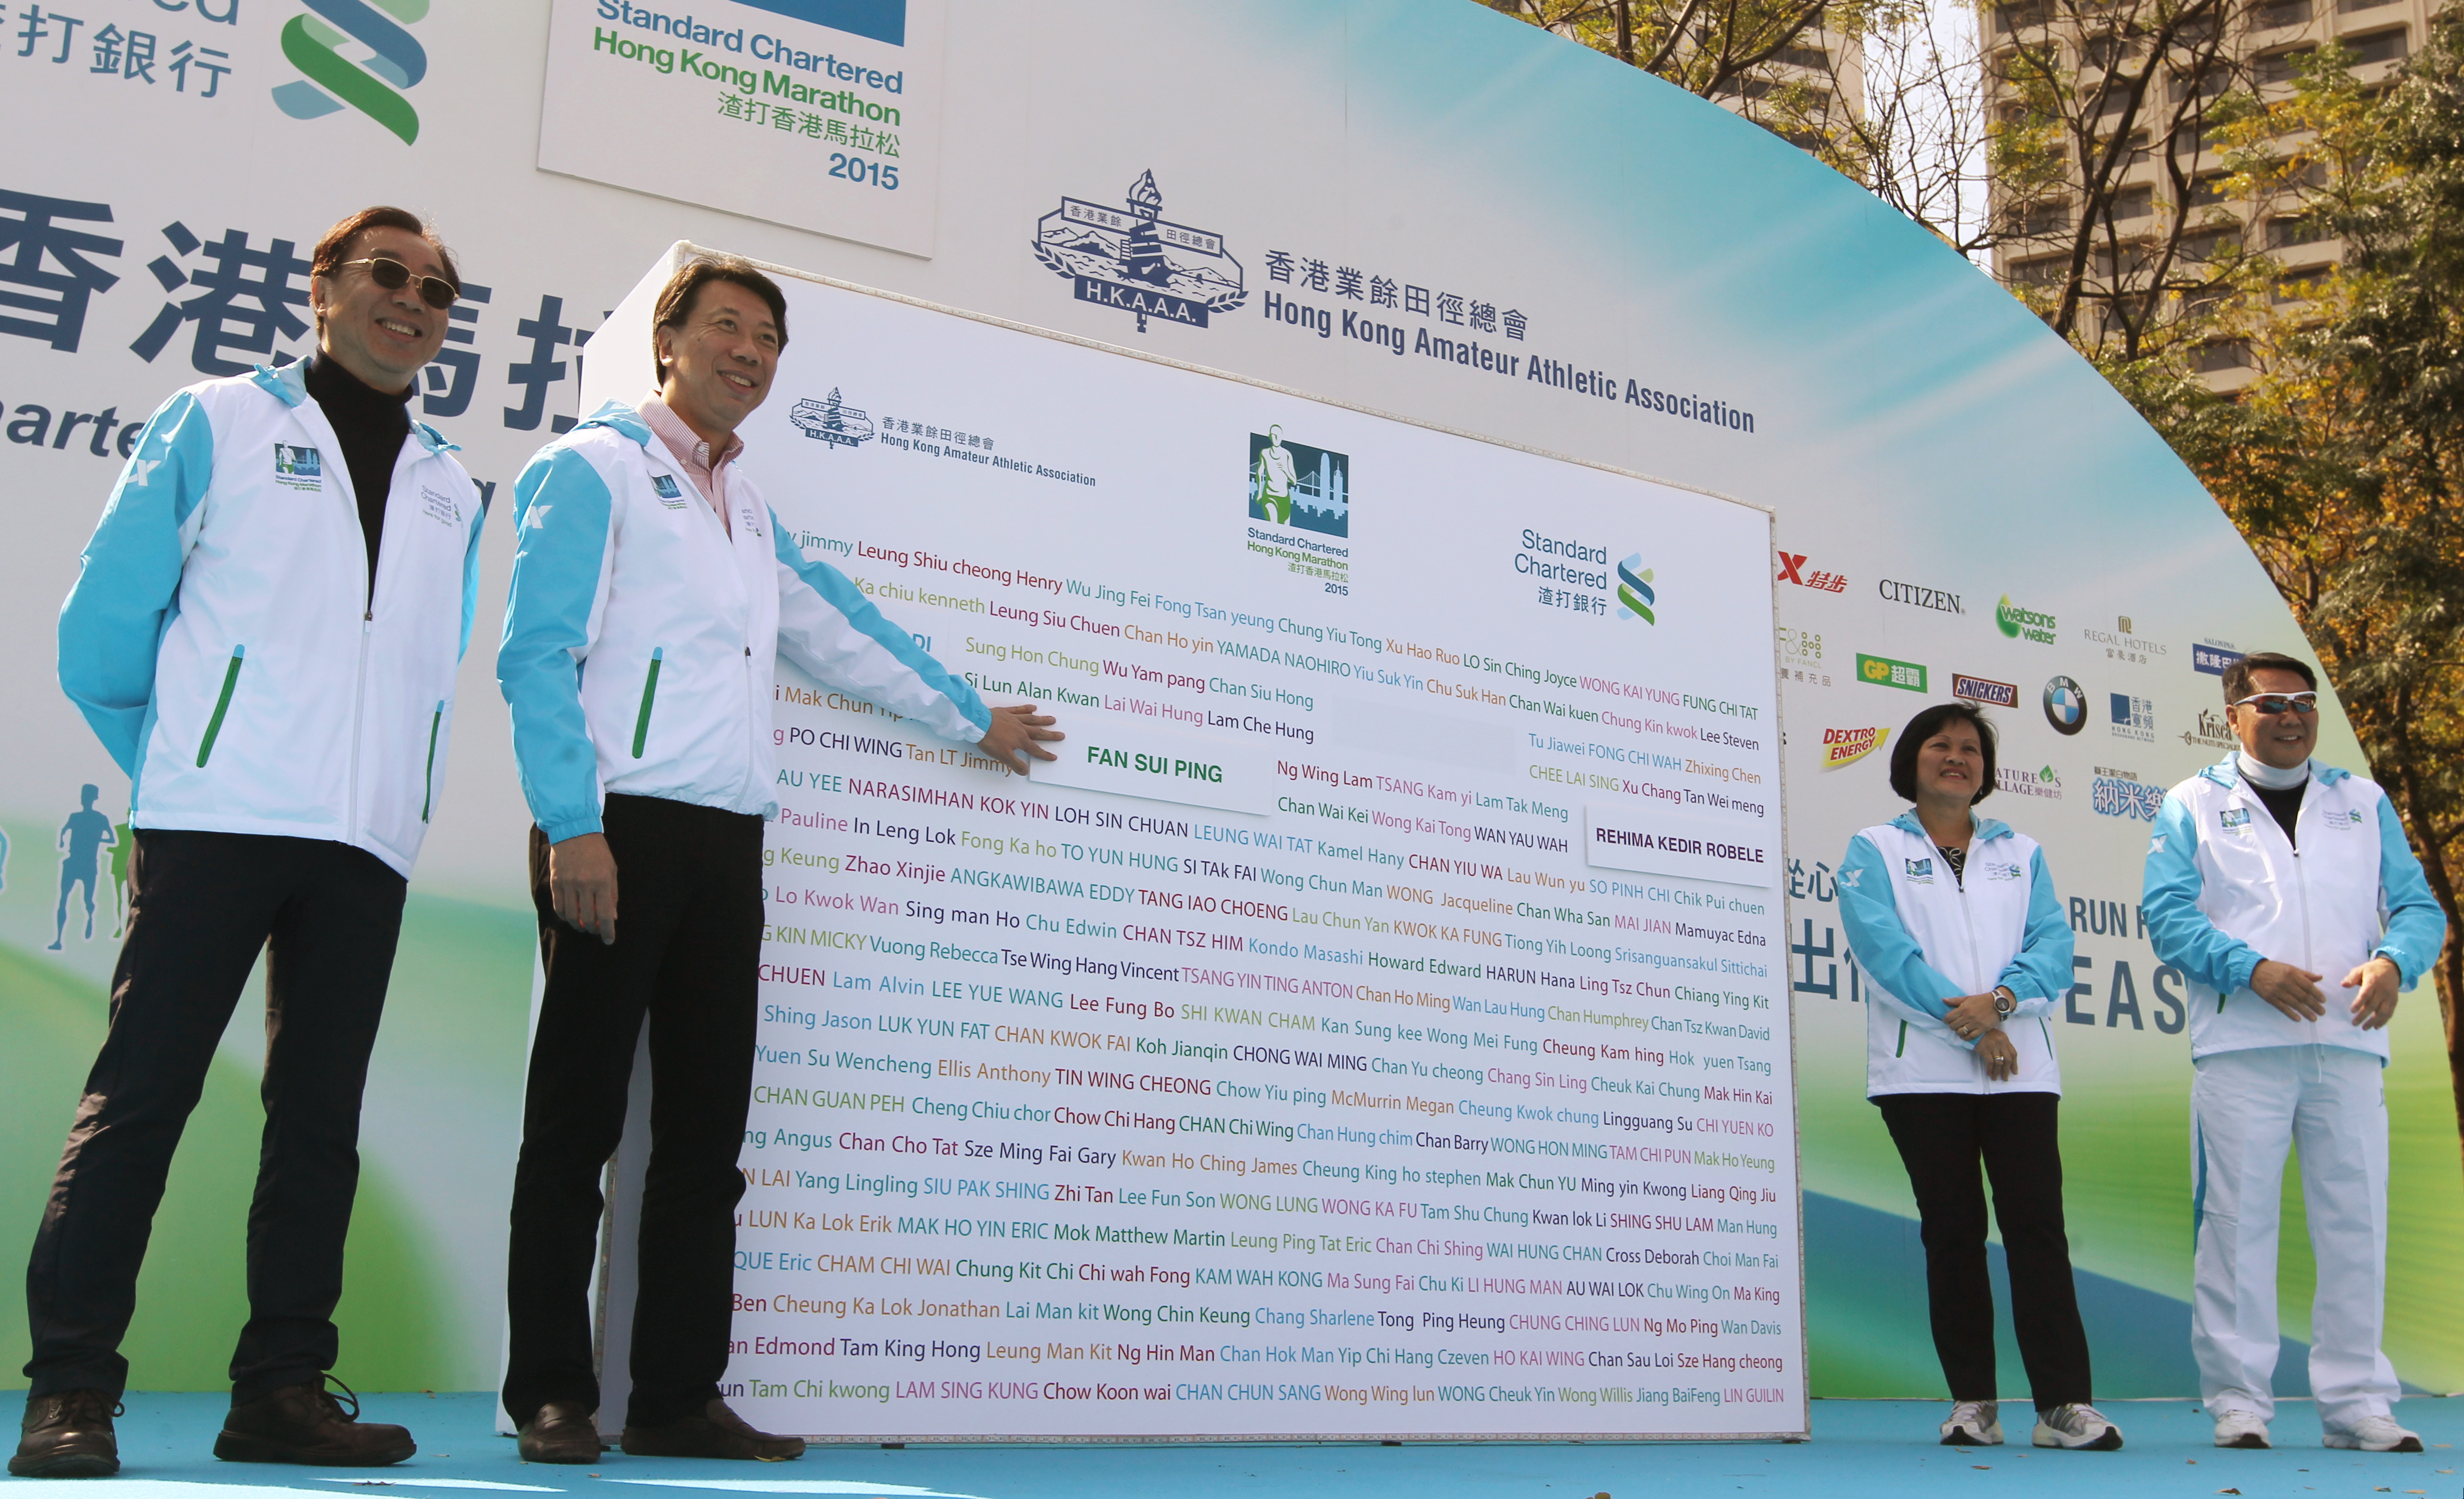 Benjamin Hung Pi-cheng, Standard Chartered Bank chief executive, joins other members of the organising committee at the opening ceremony for the 2015 edition of the Standard Chartered Hong Kong Marathon. Photo: SCMP Pictures